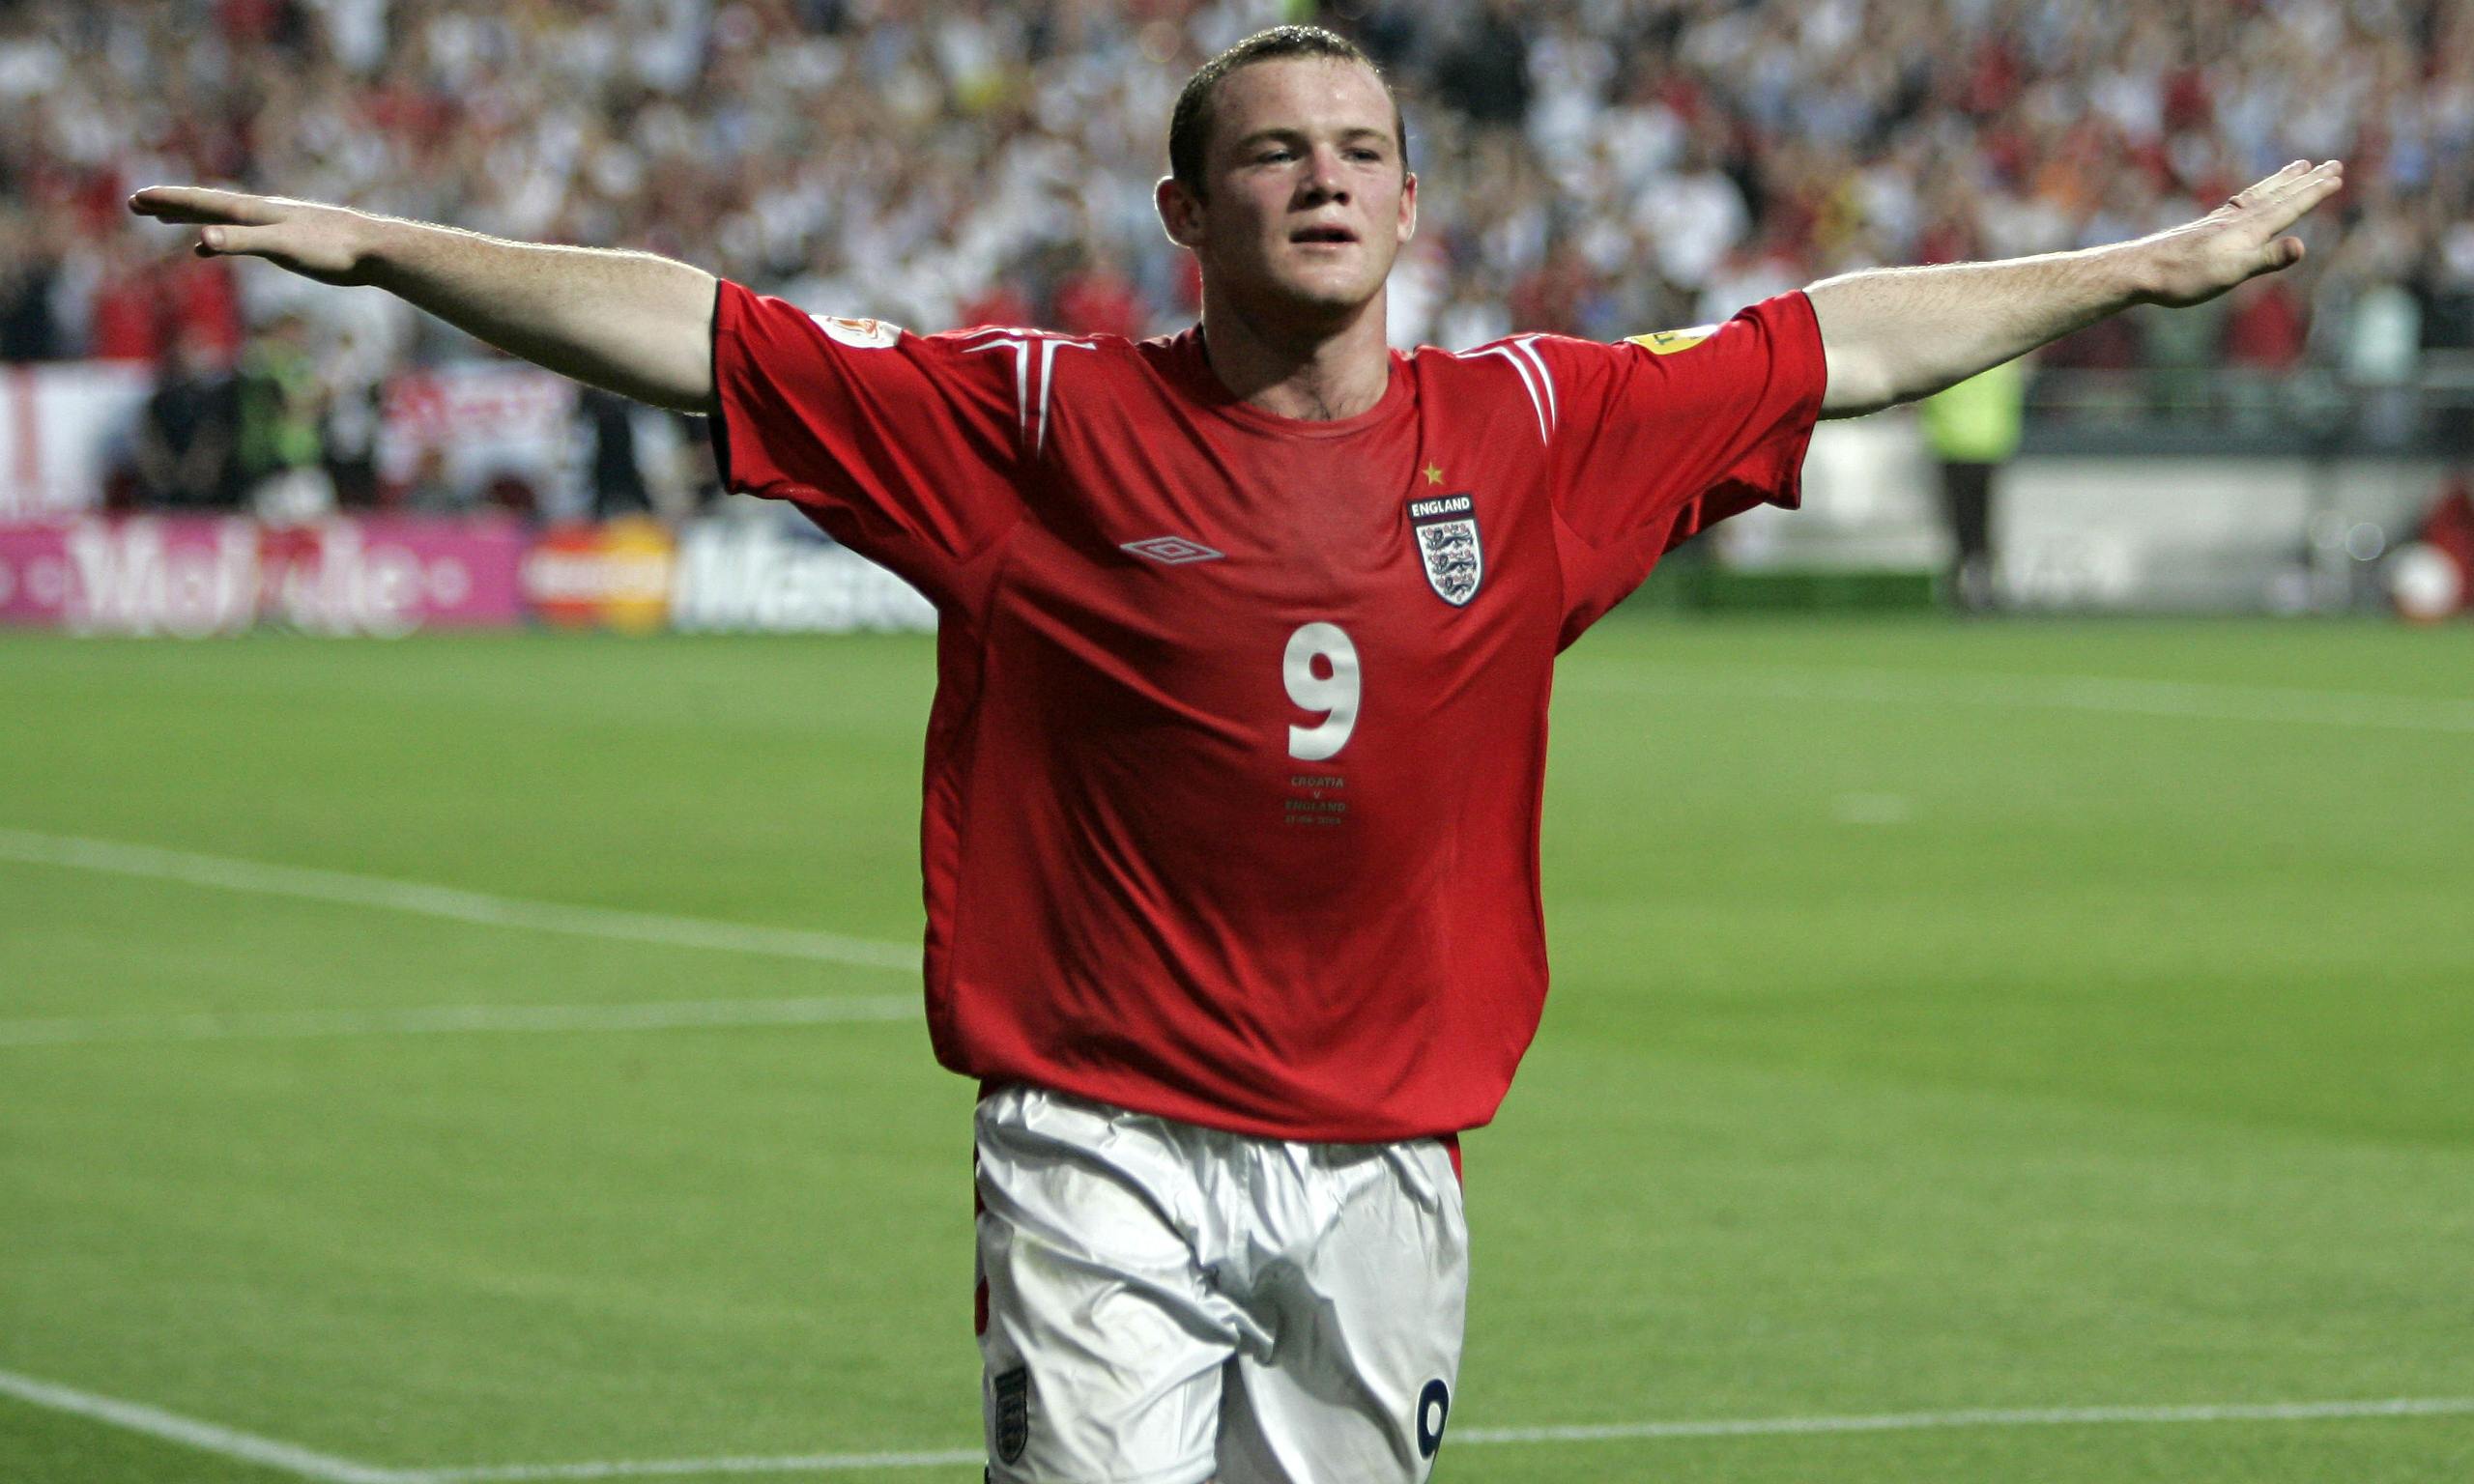 From boy wonder to burden: The enigmatic Wayne Rooney | World Cup Joga Bonito